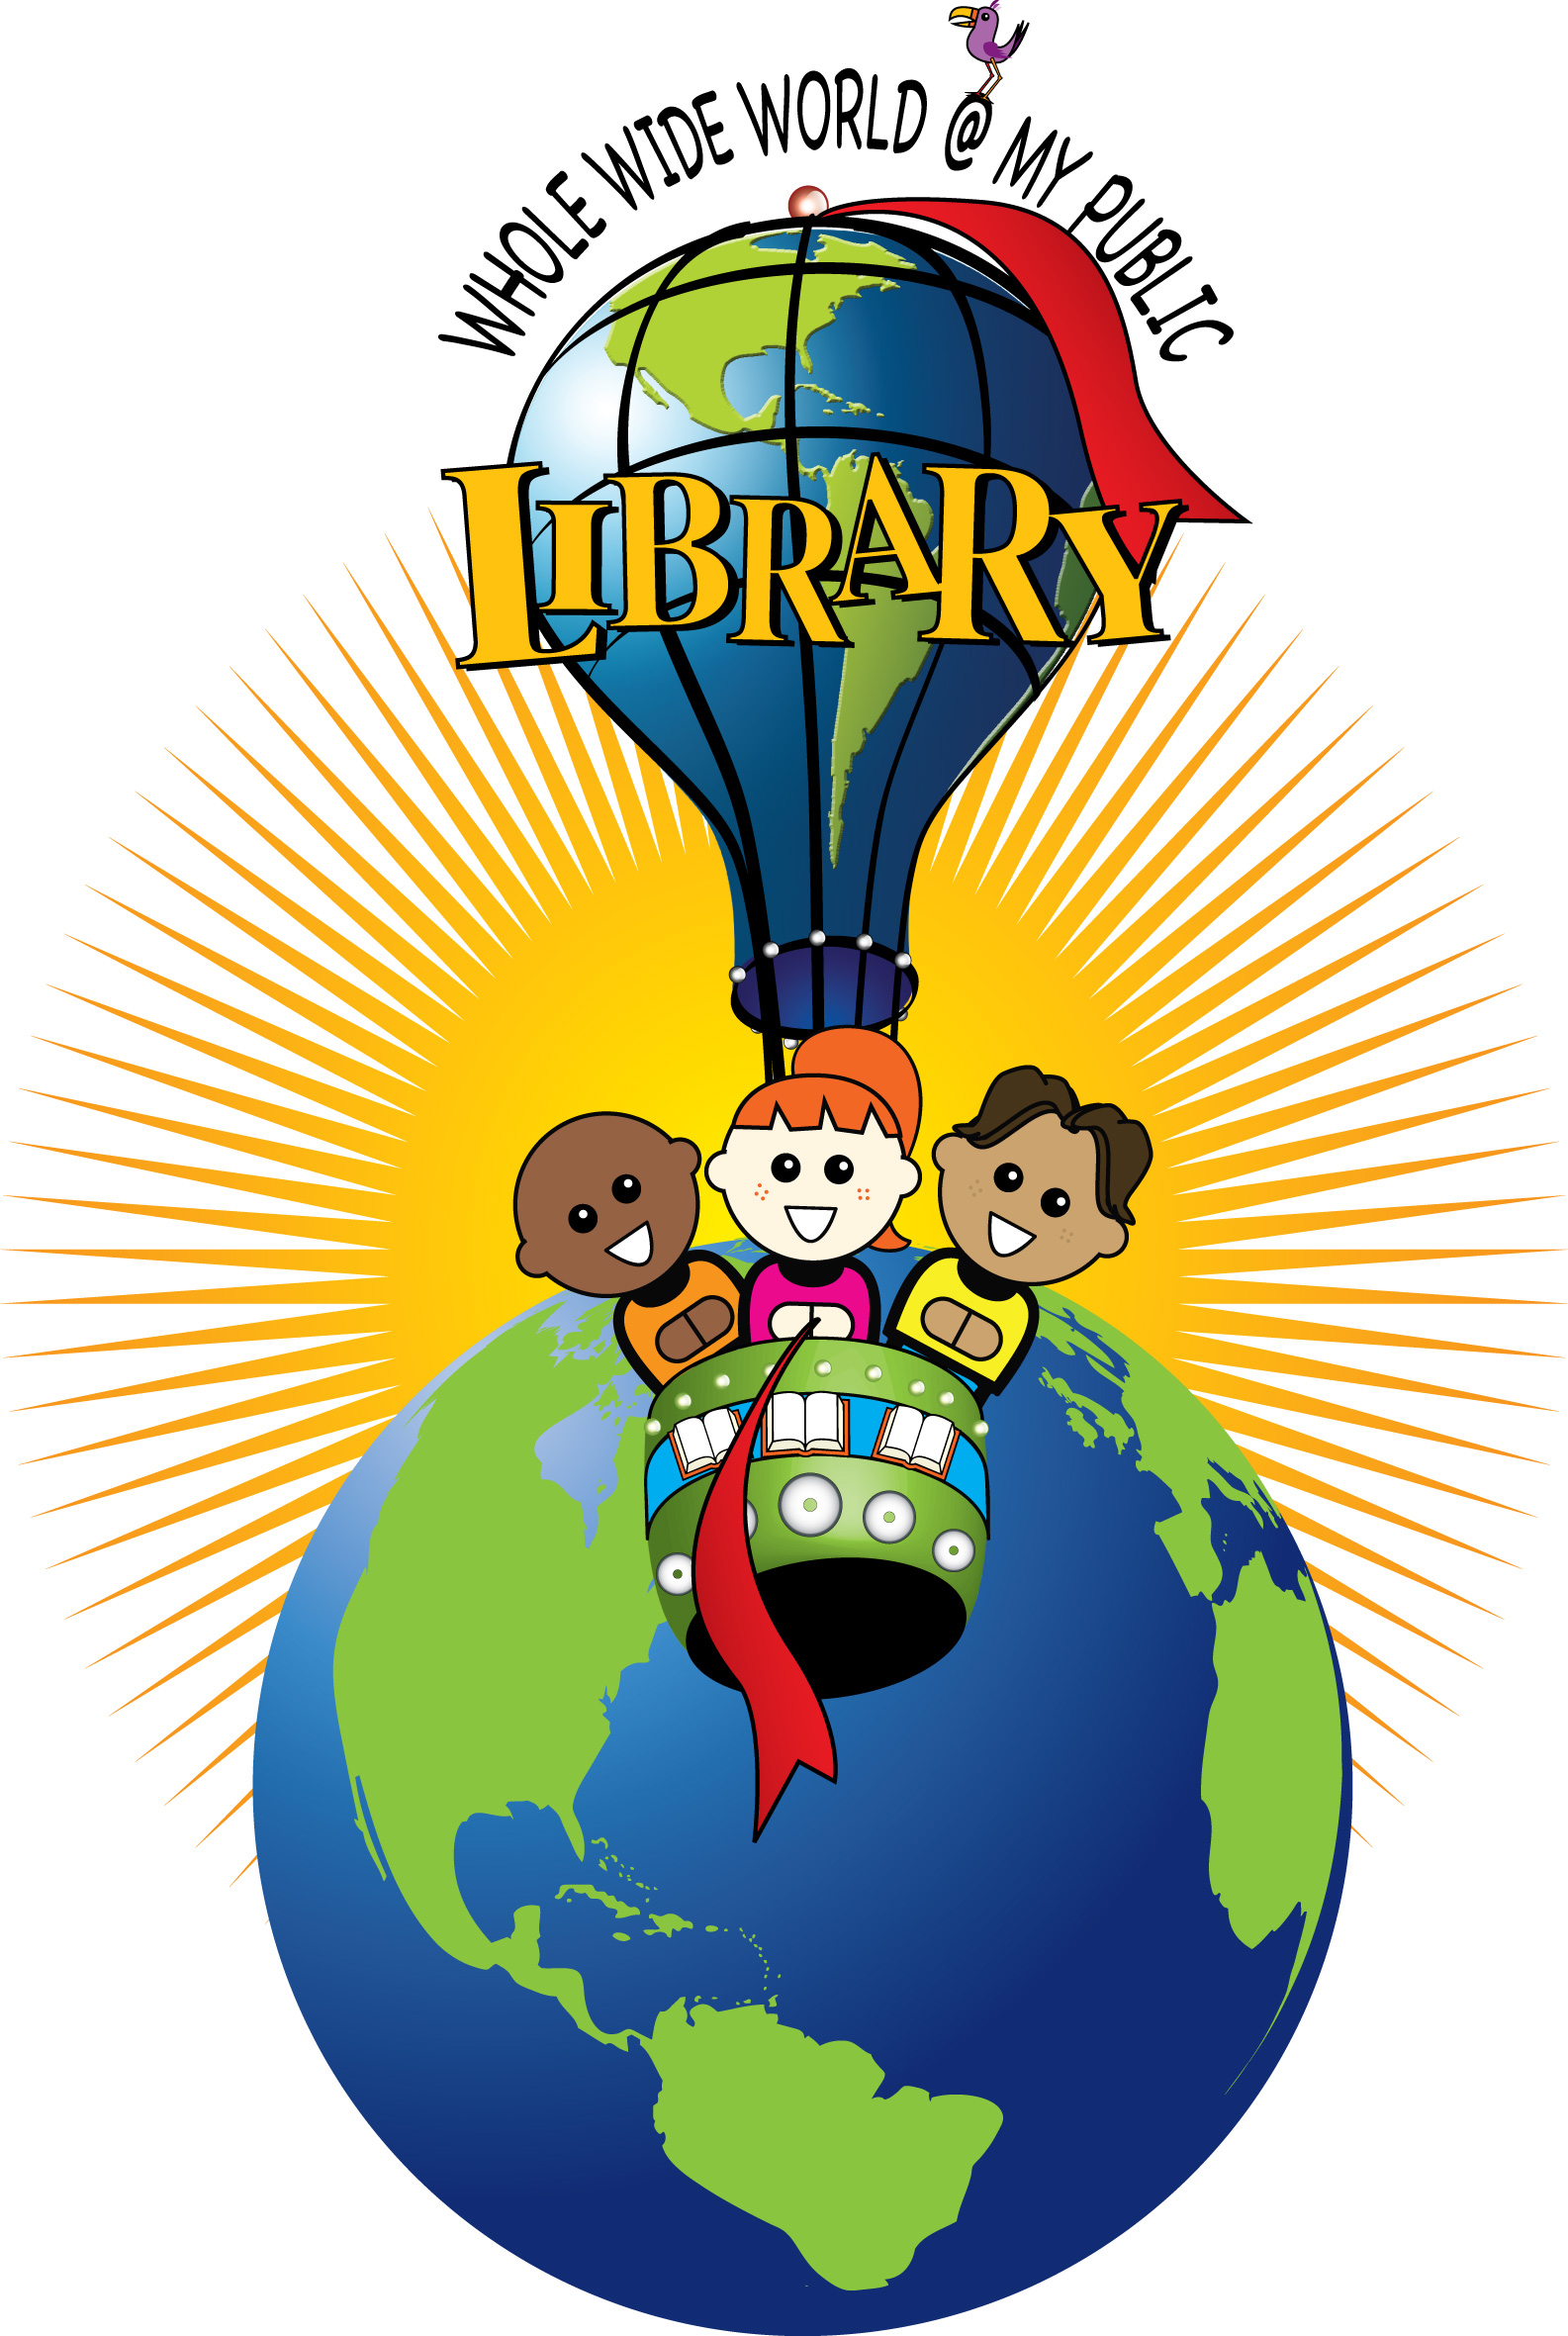 School Library Clipart